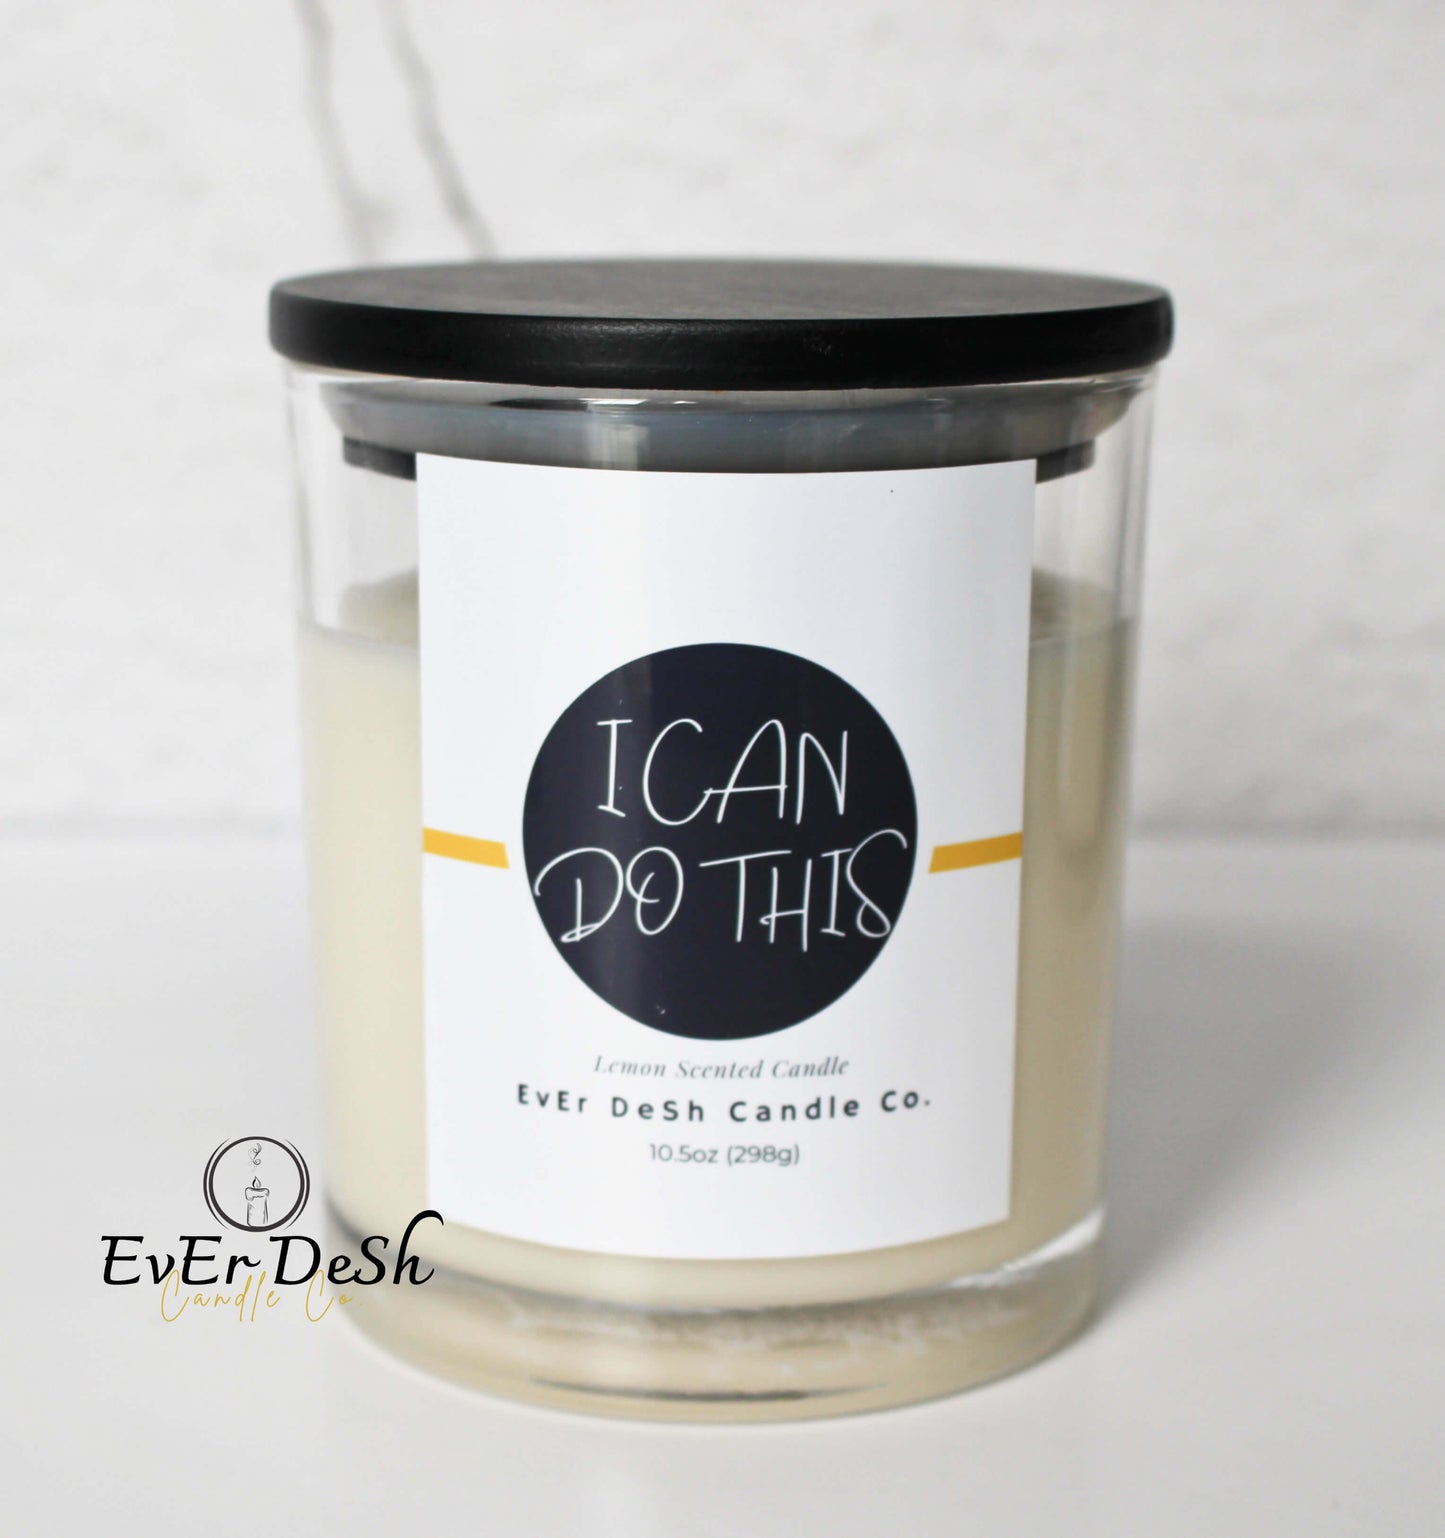 I CAN DO THIS! | Lemon Scented Candle